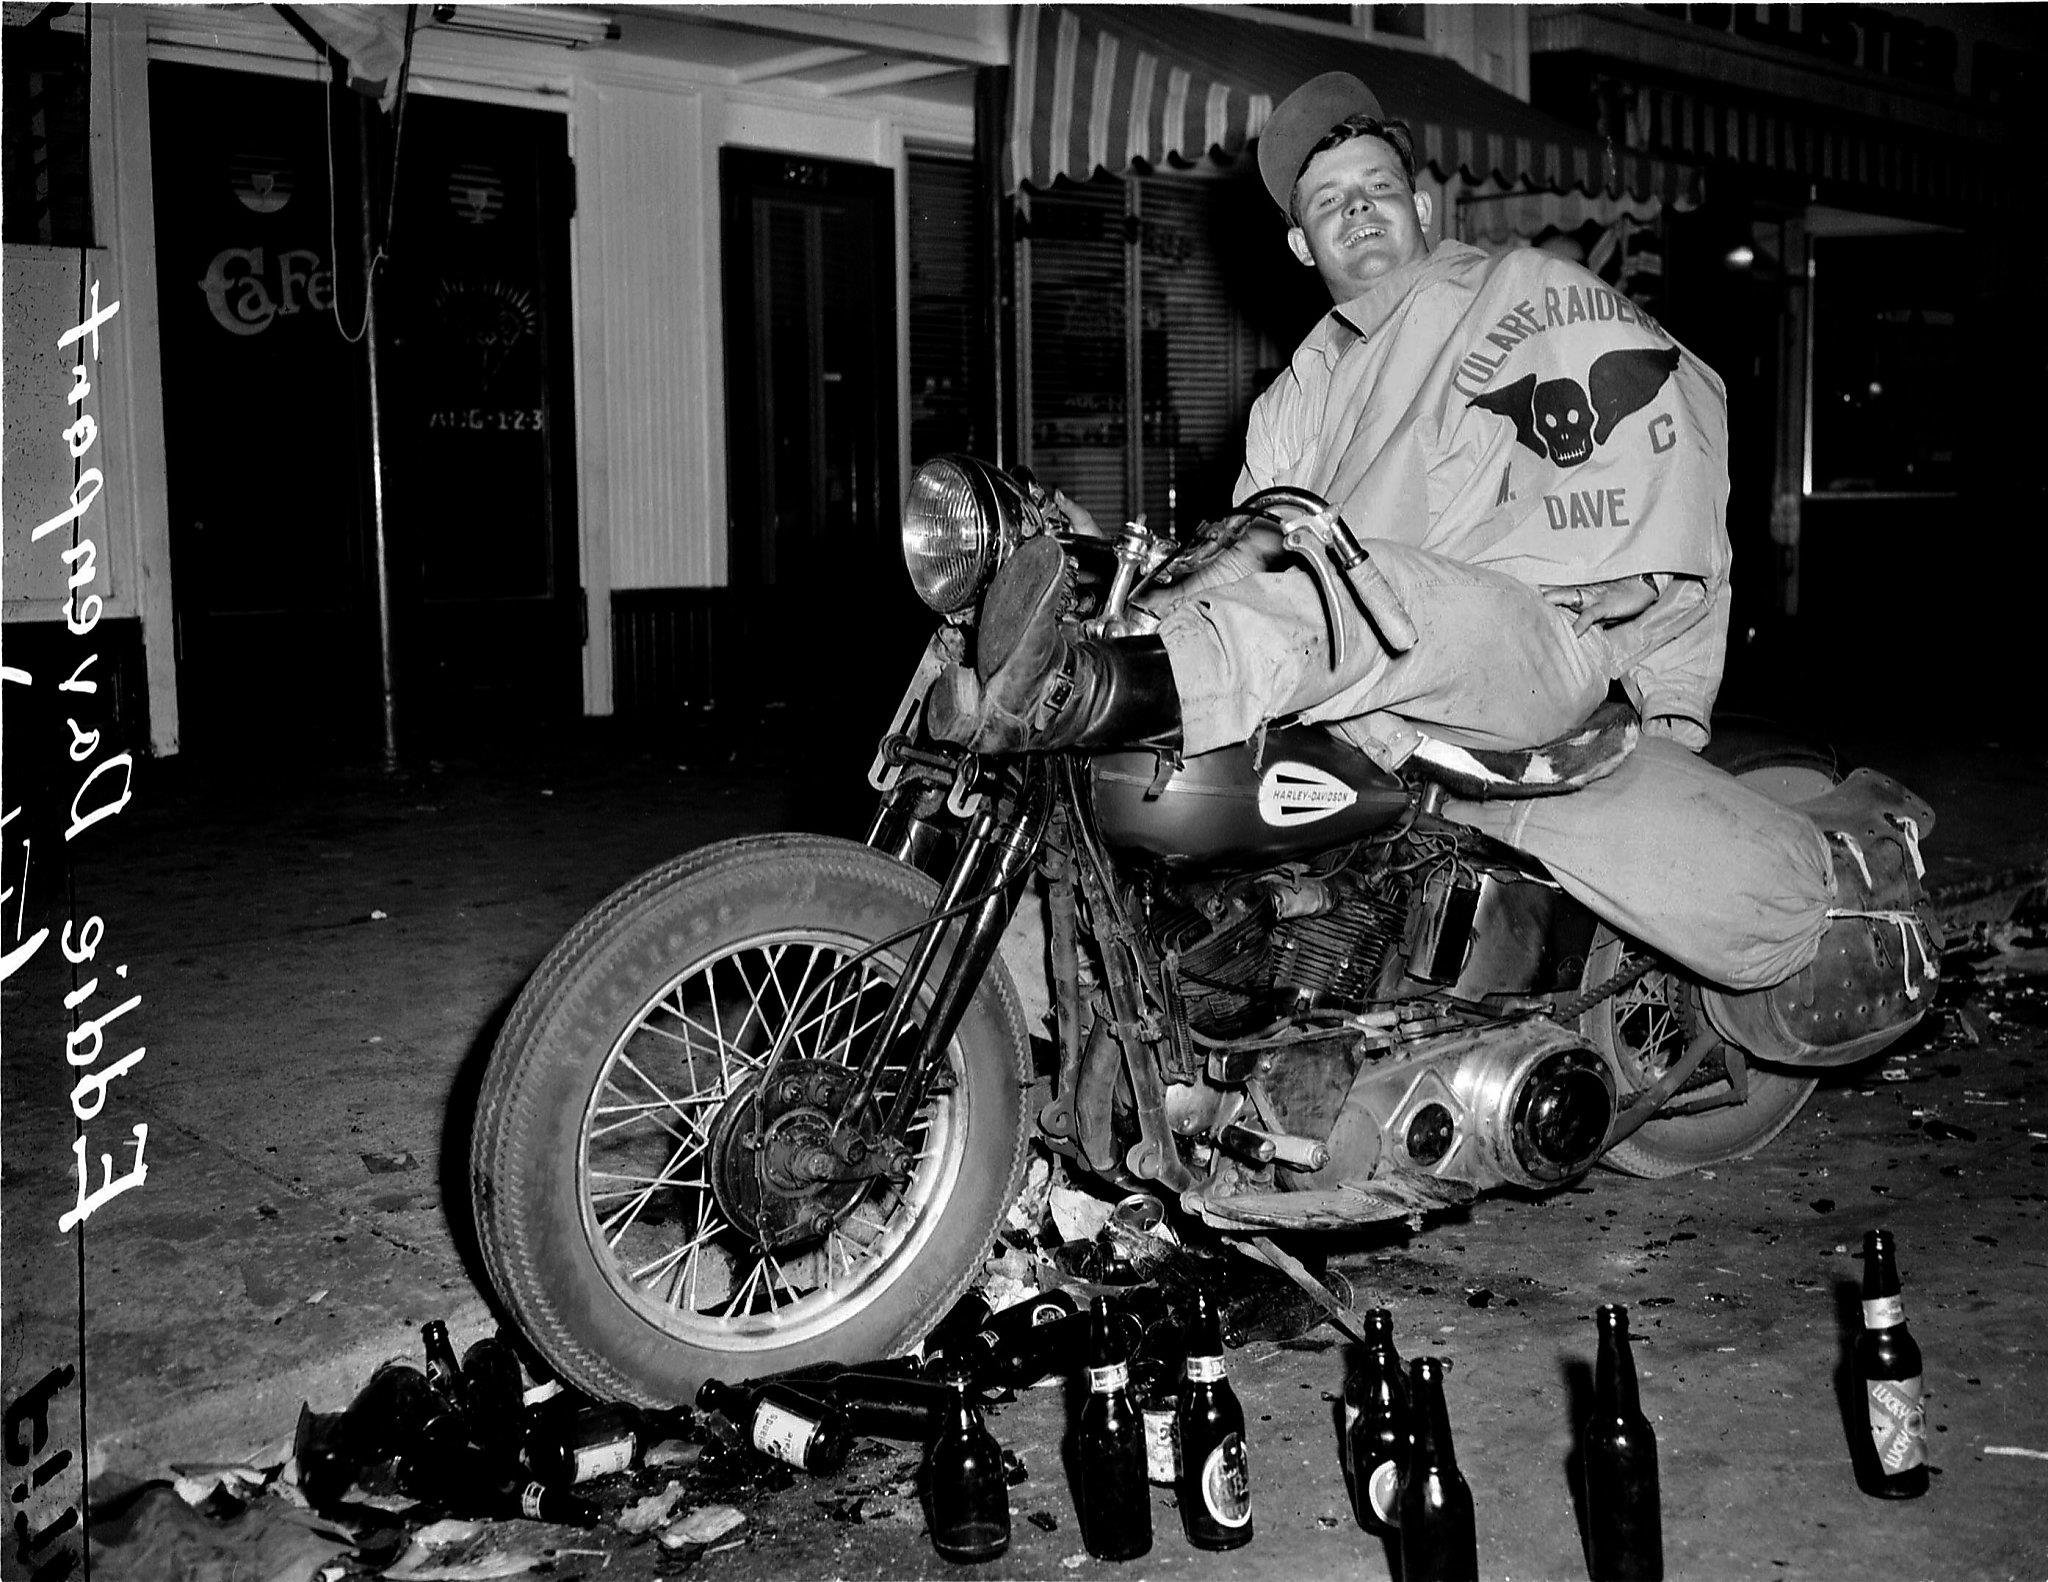 A bikker on a Harley during the Hollister Riots in California in 1947